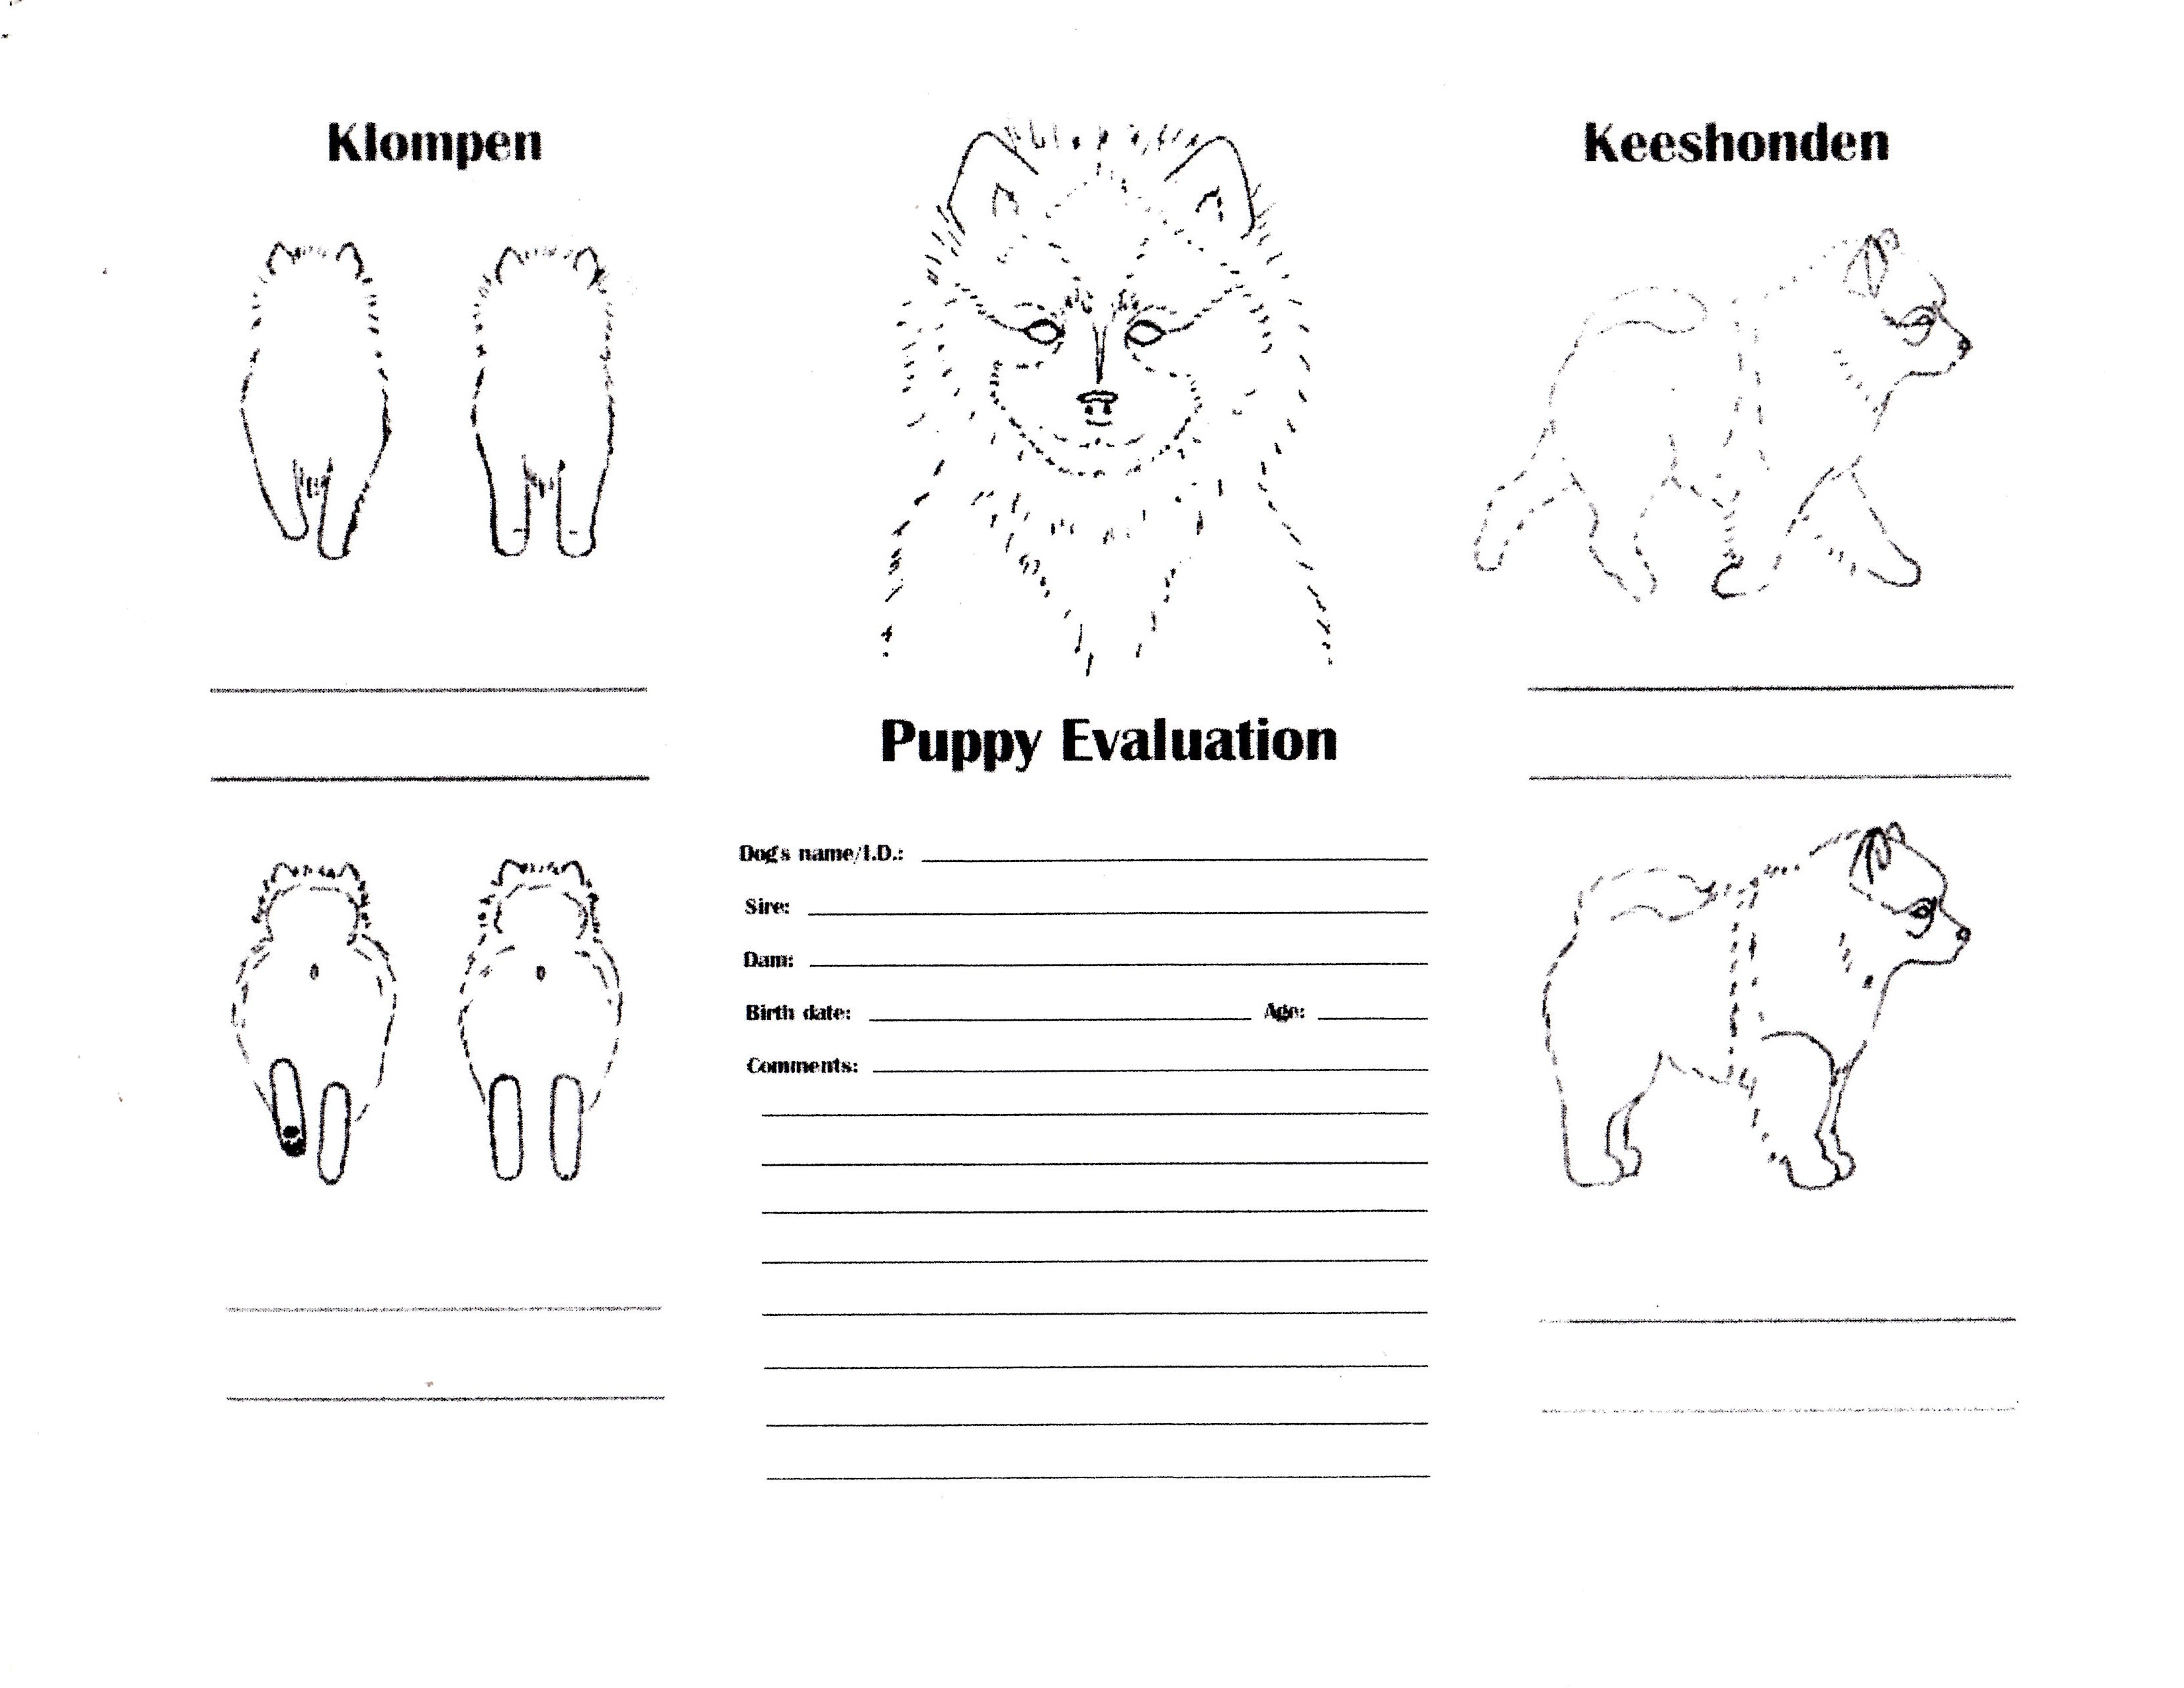 Puppy Evaluation page 1